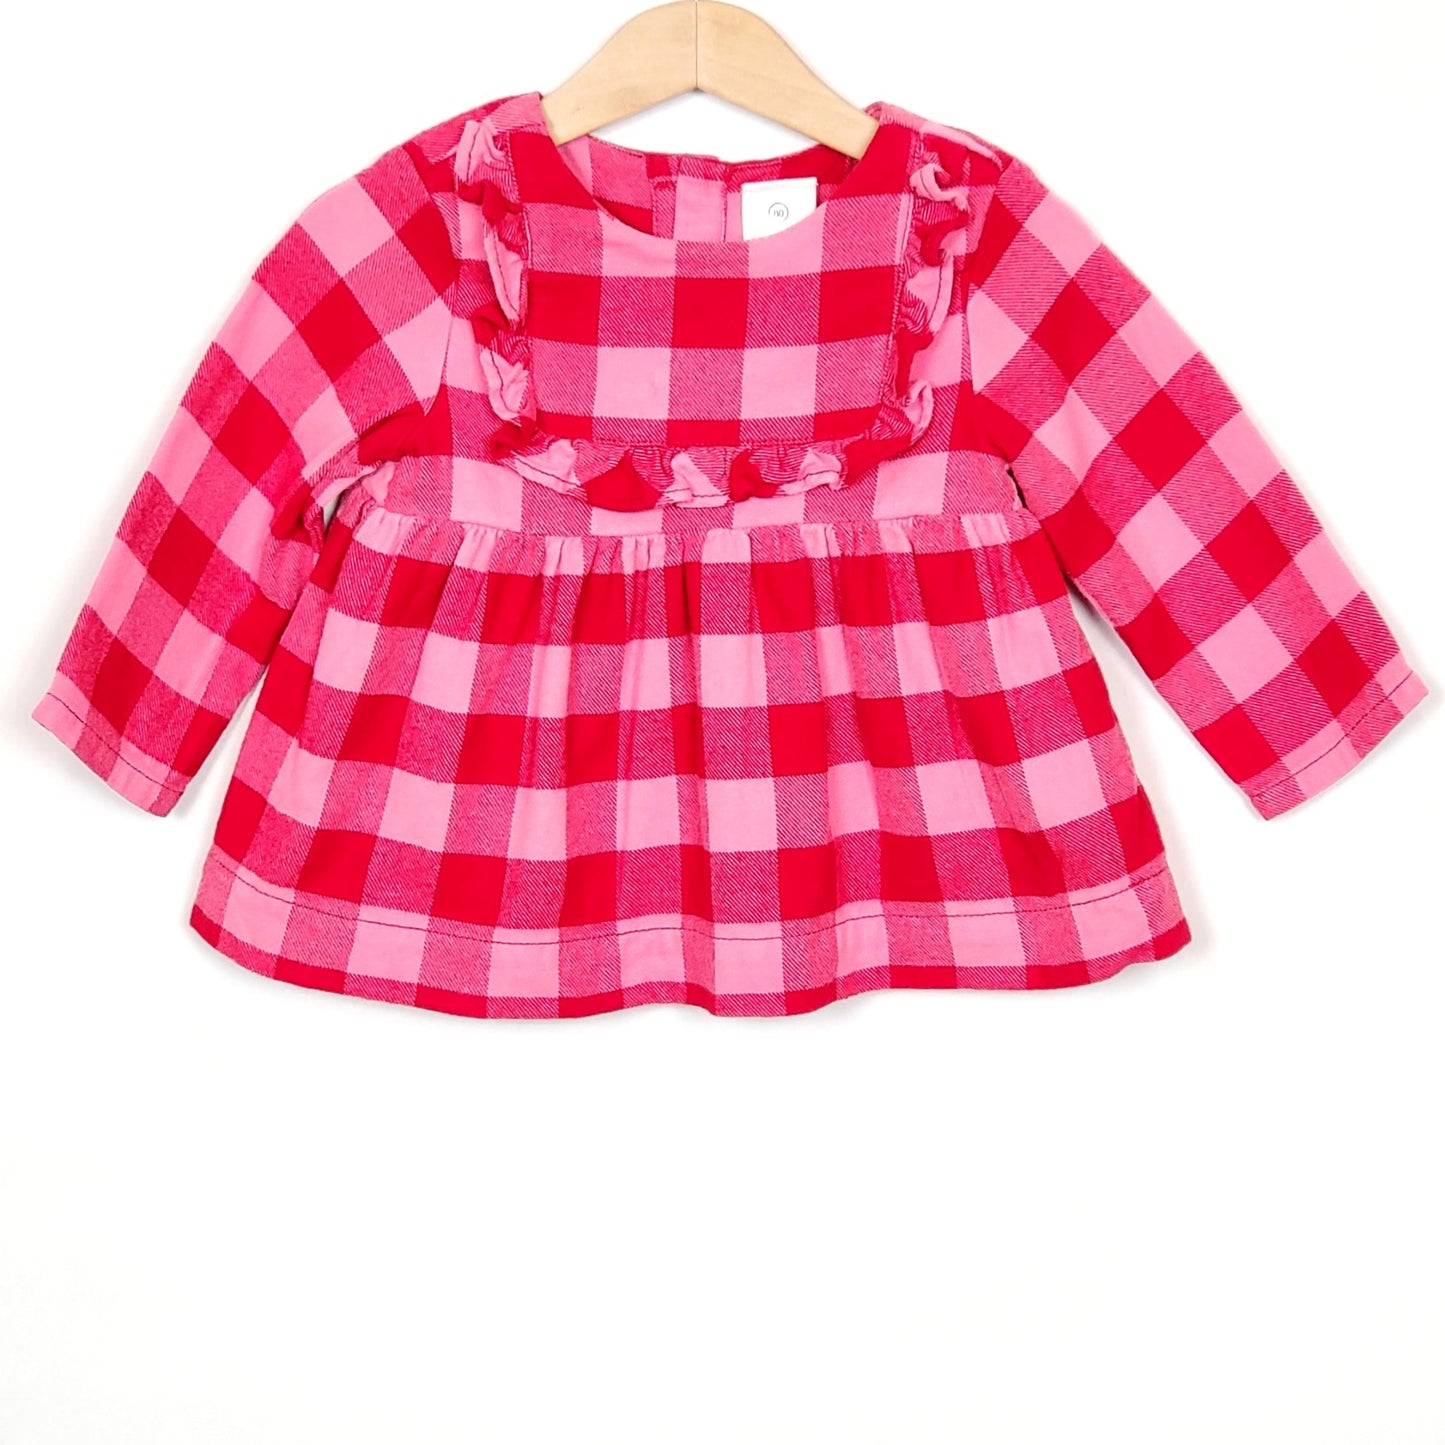 Hanna Andersson Girls Pink Red Plaid Top 18M Used View 1